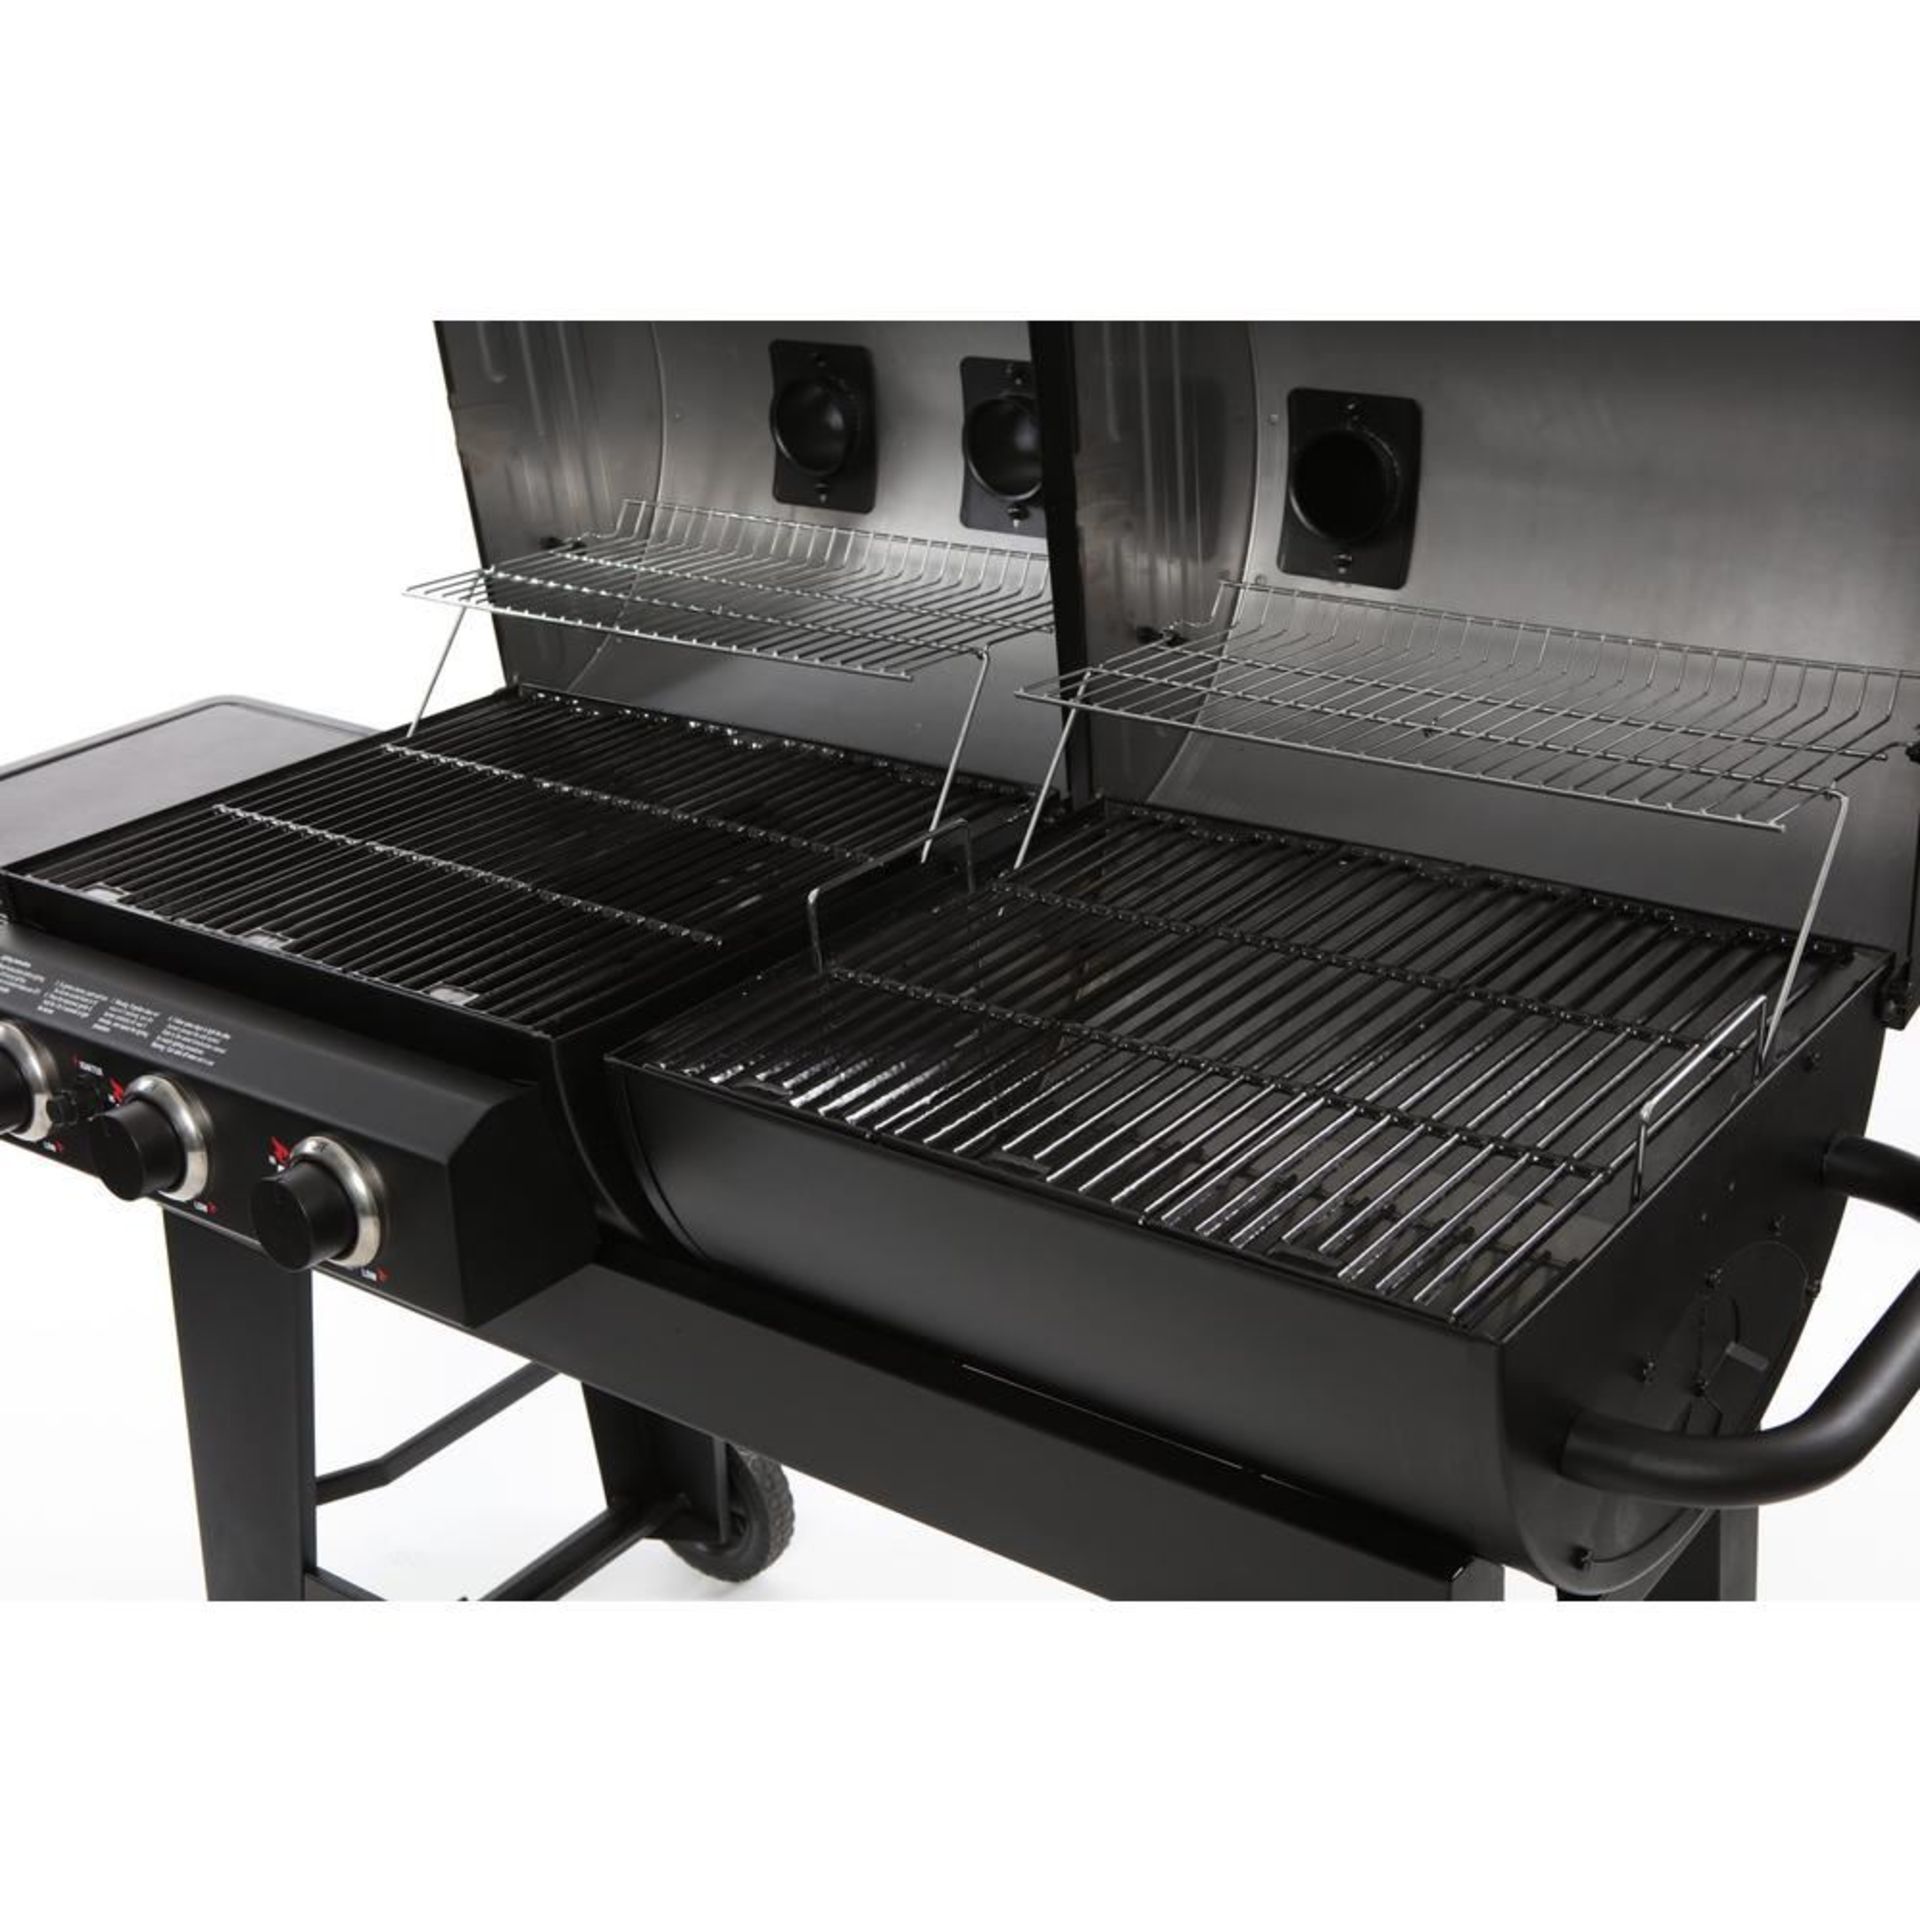 Char-Griller 3-Burner Gas and Charcoal Grill in Black - Image 3 of 3